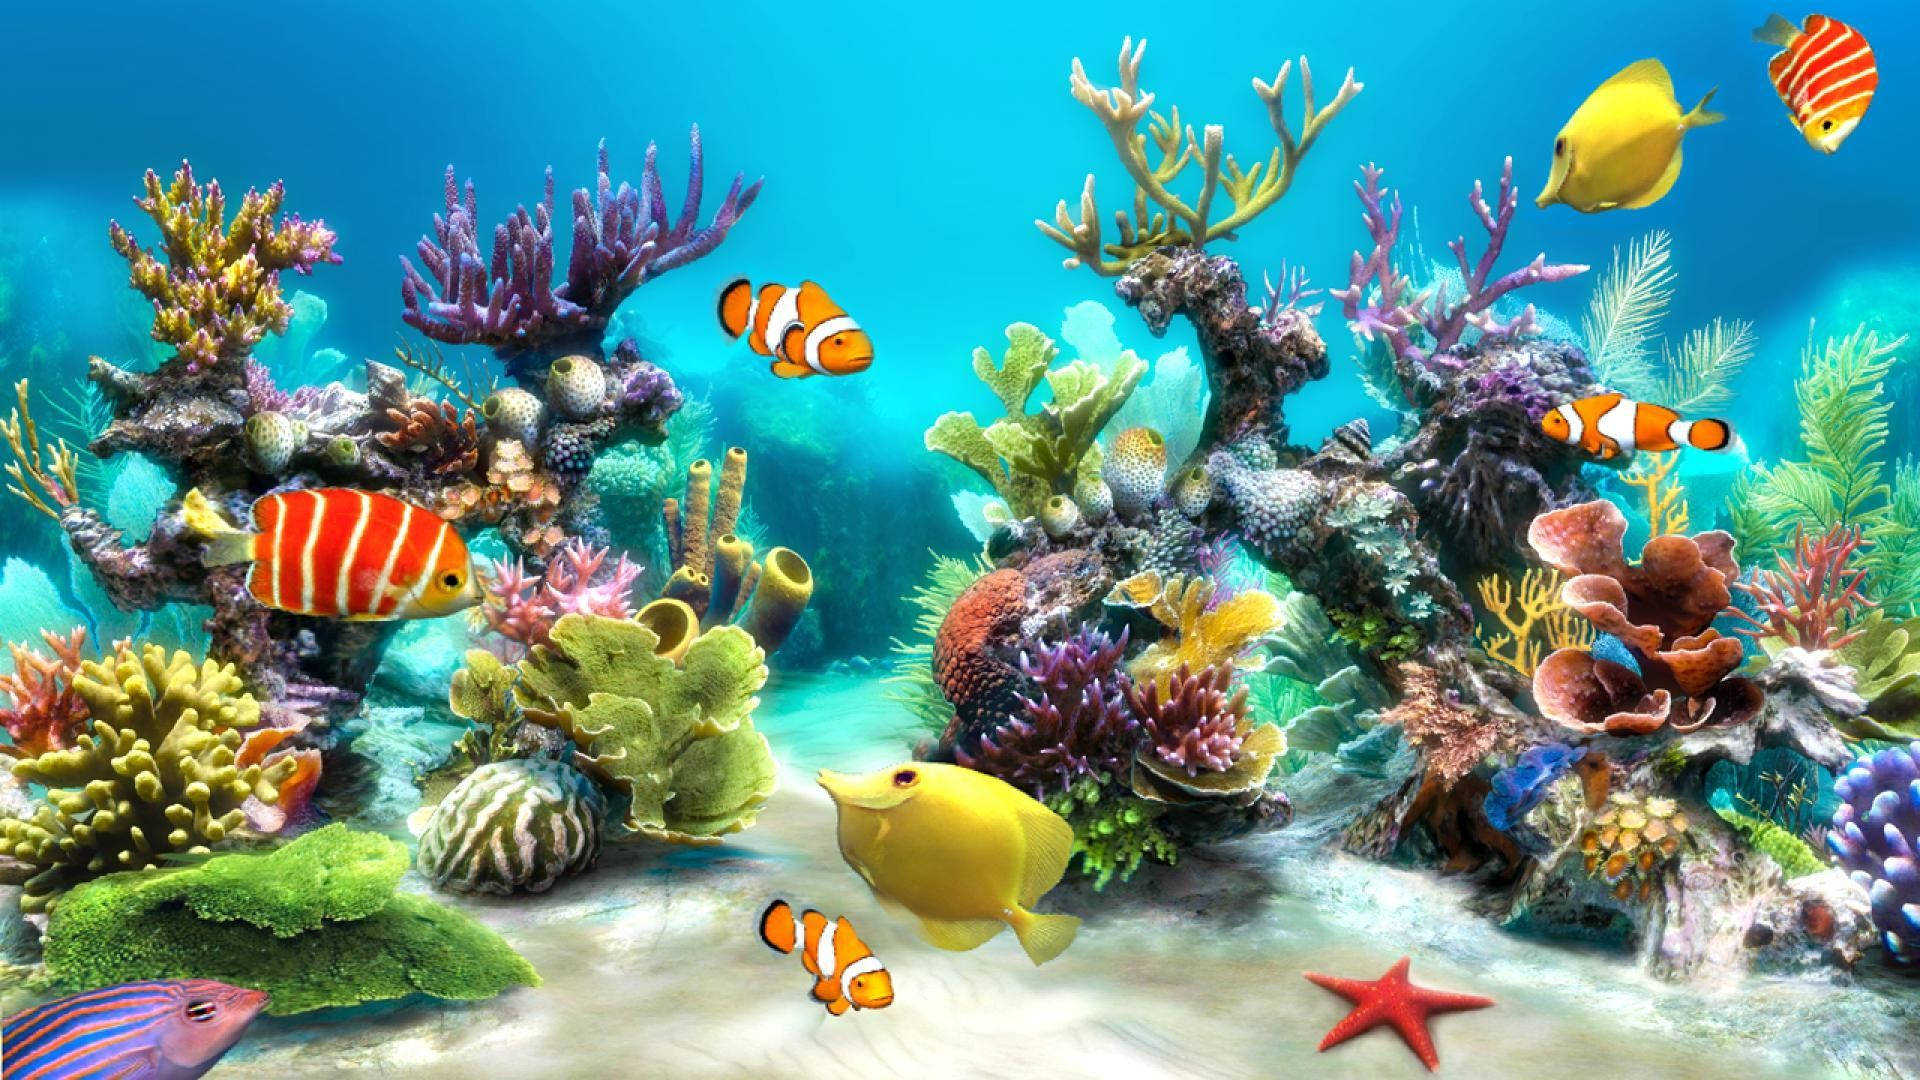 Corals And Fishes Animated Desktop Wallpaper